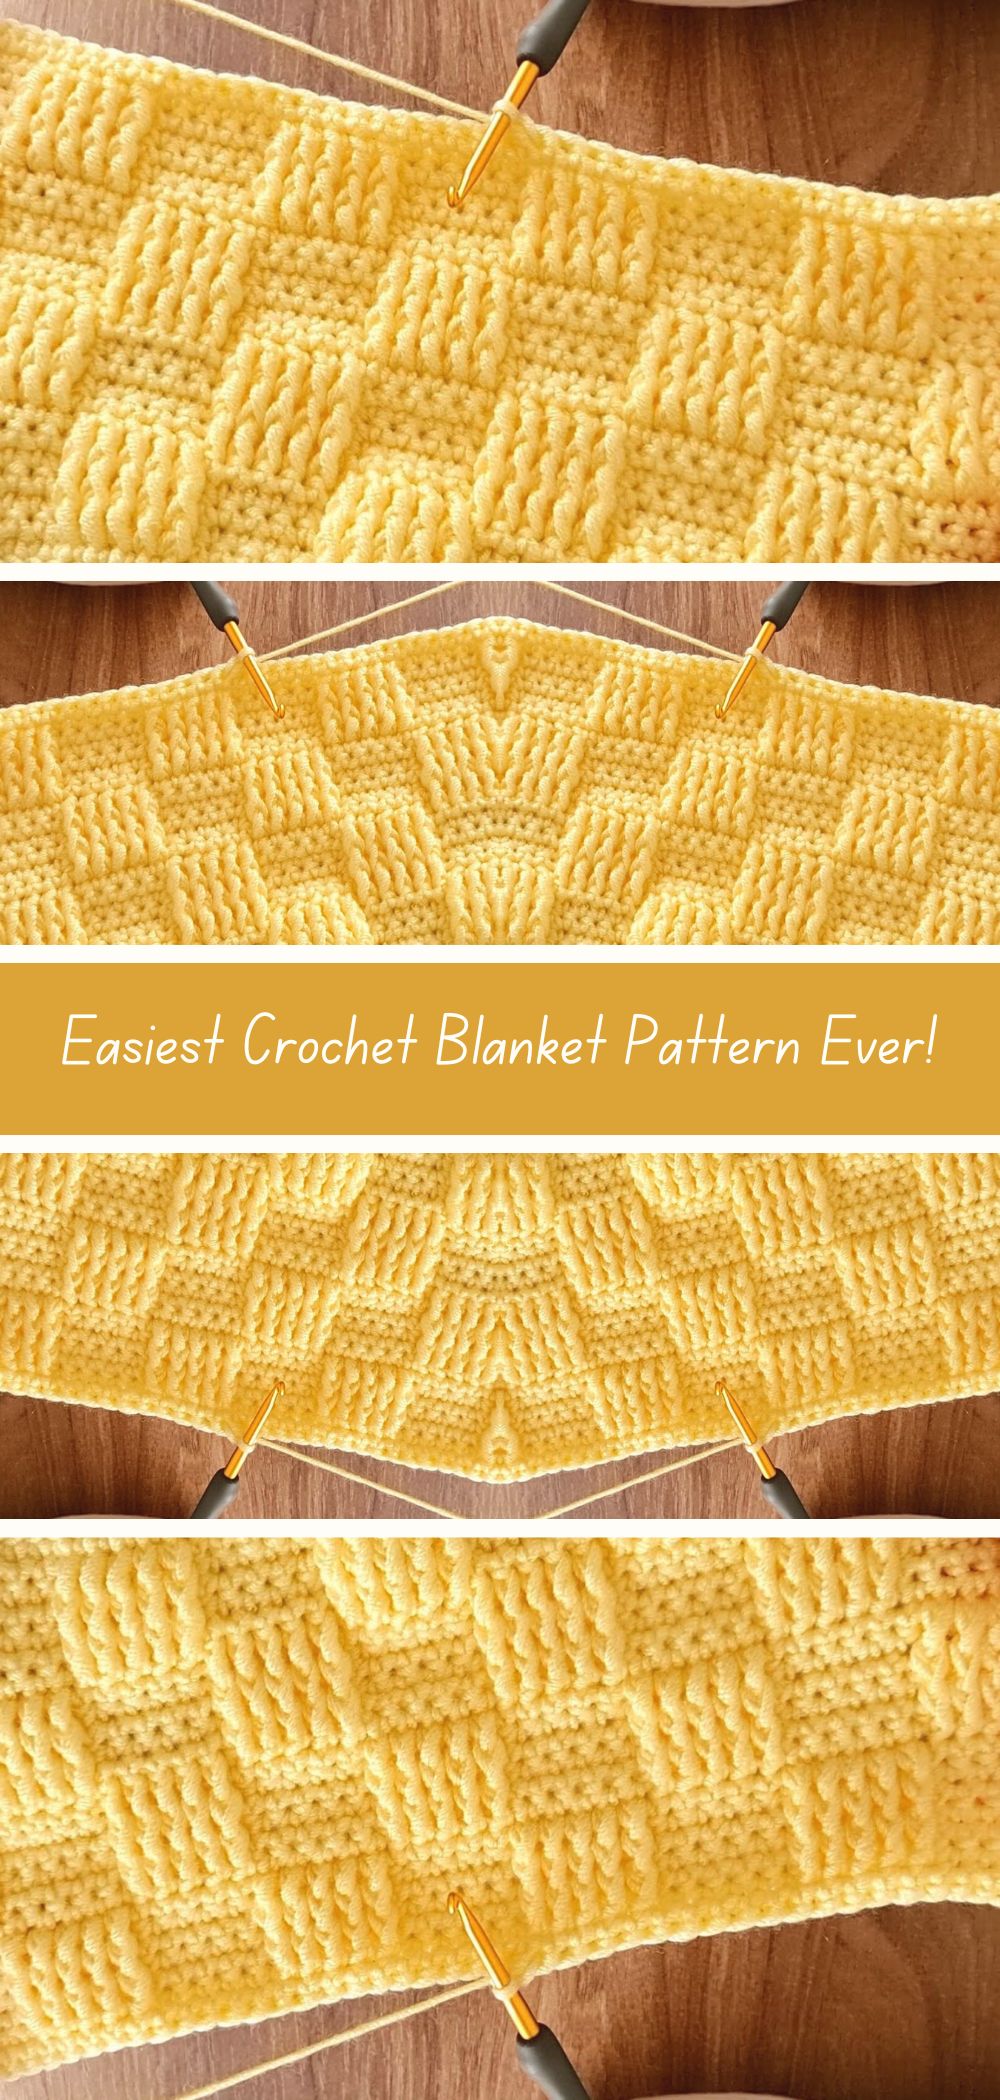 Simplest Crochet Blanket: Easy Pattern - Create a cozy and stylish blanket with this beginner-friendly crochet pattern